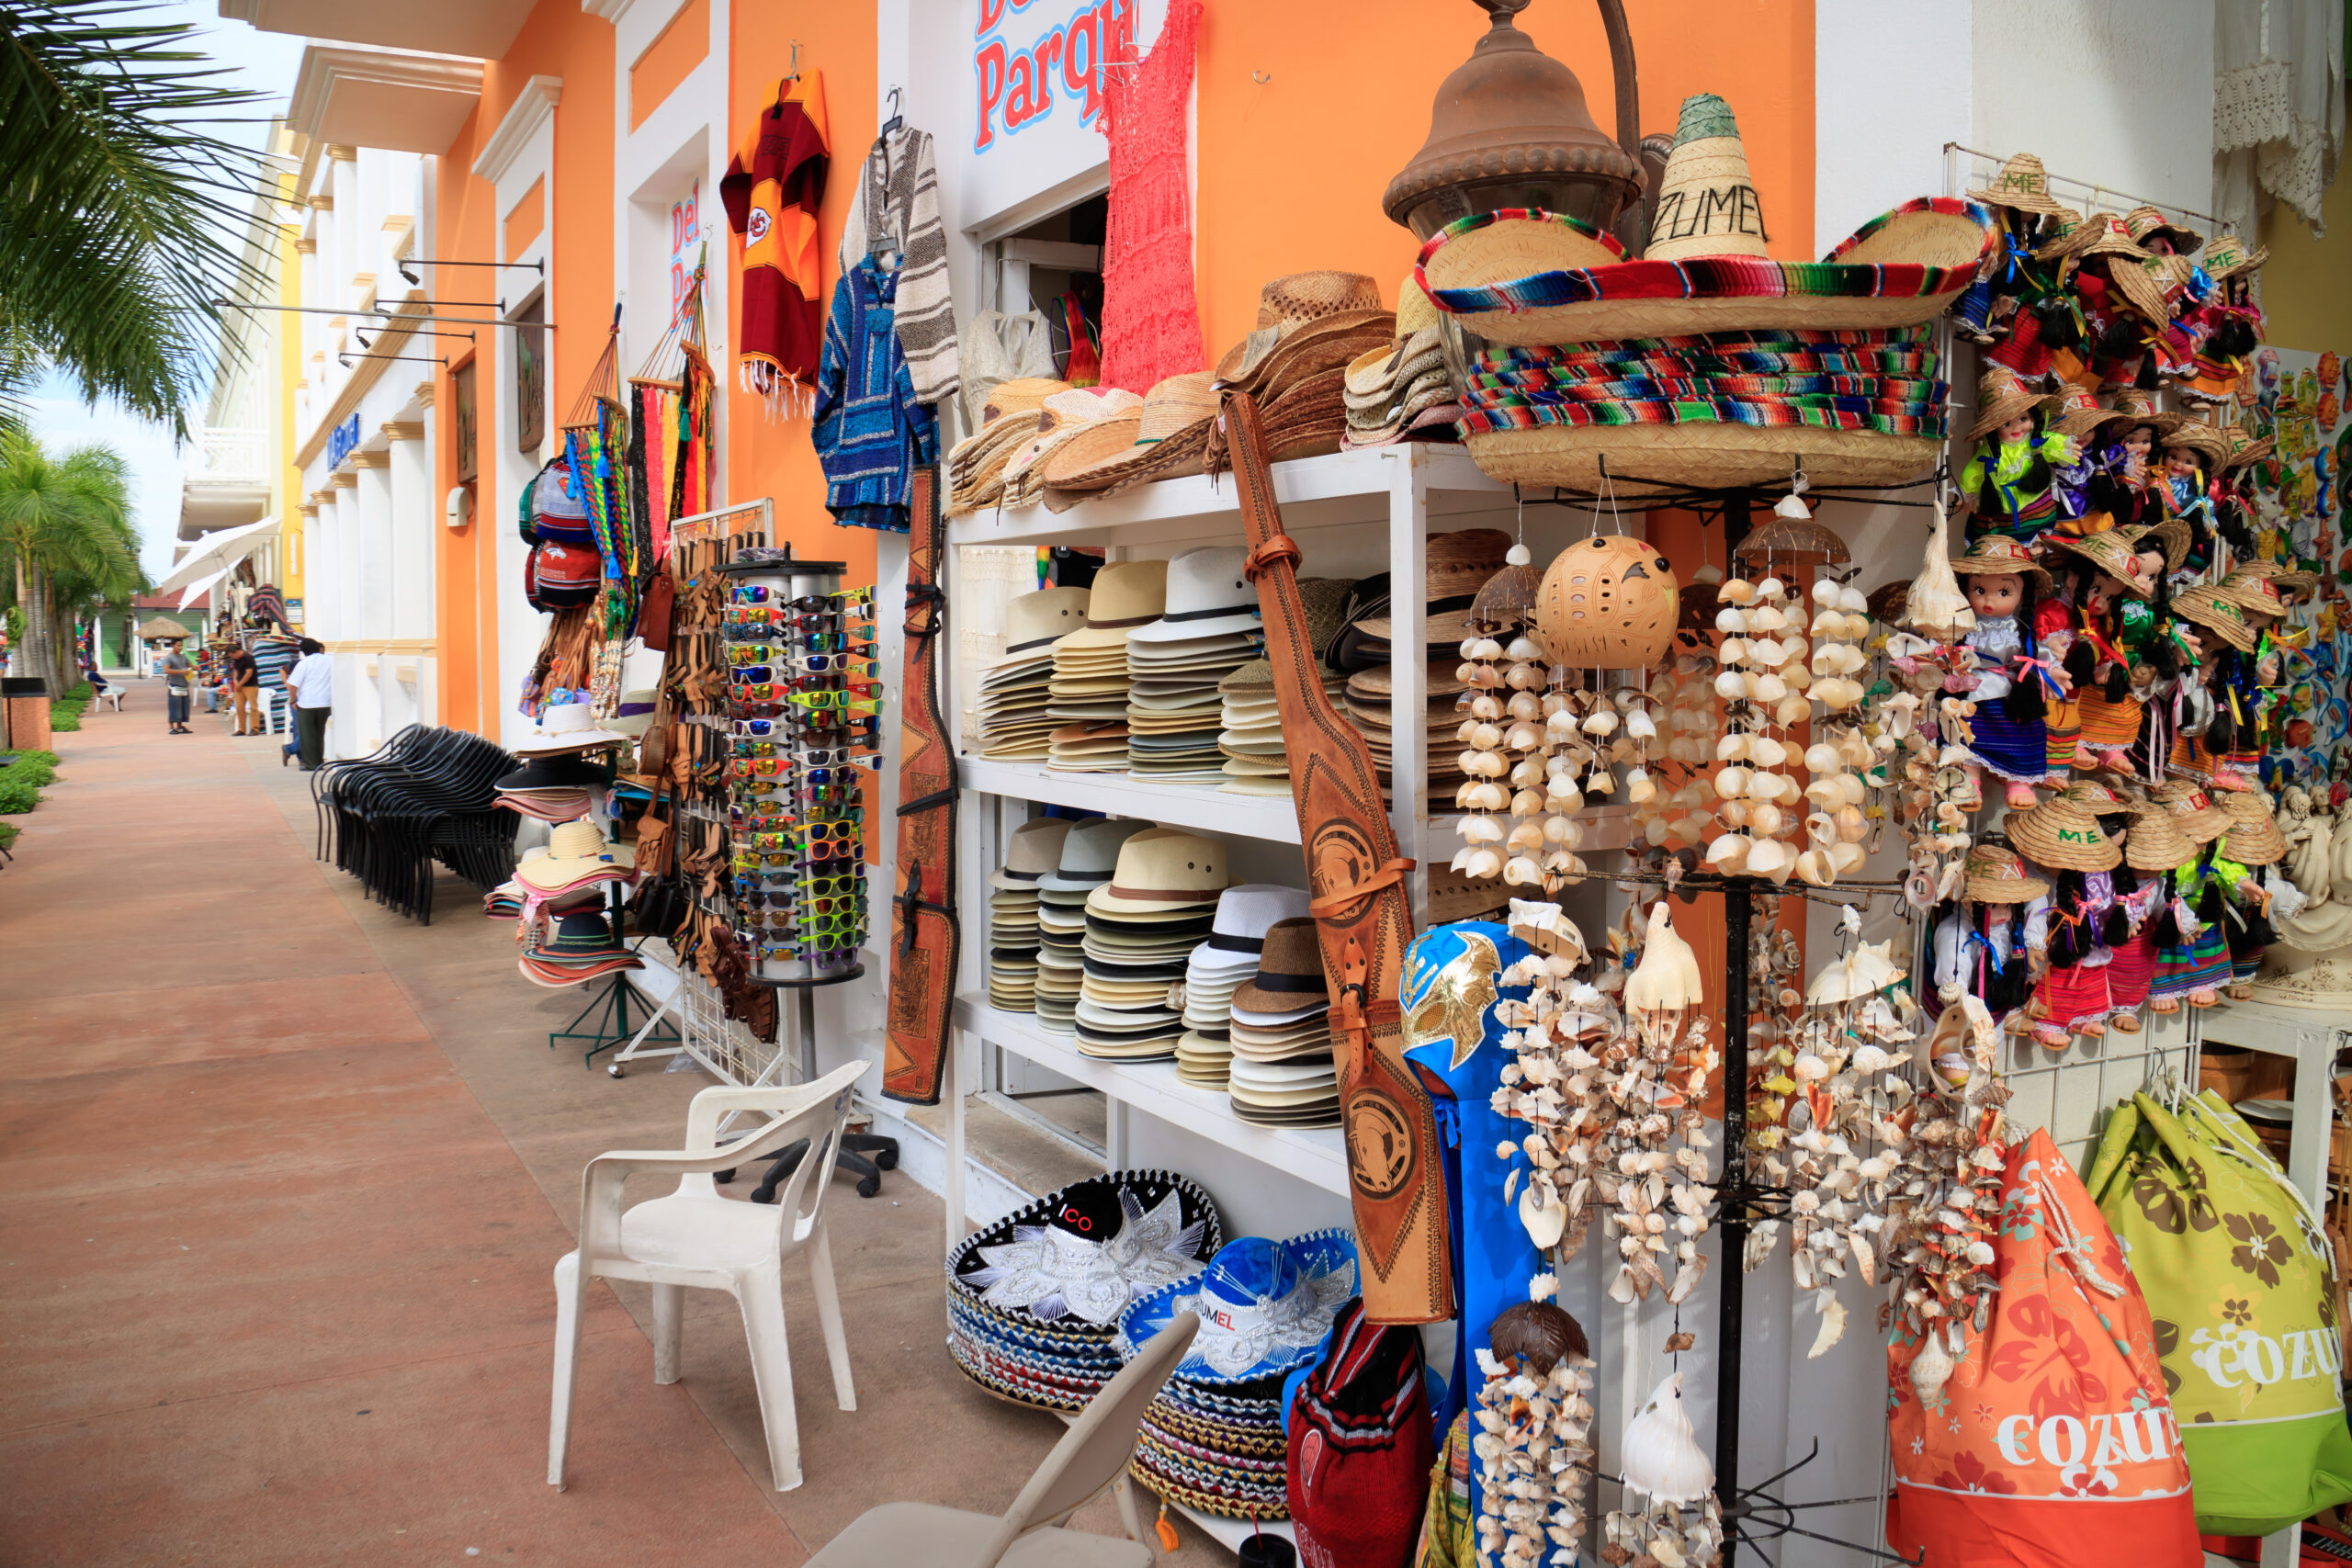 COZUMEL, MEXICO - OCT, 22, 2016: There are many souvenirs and shopping options for the tourists on the Cozumel Island.